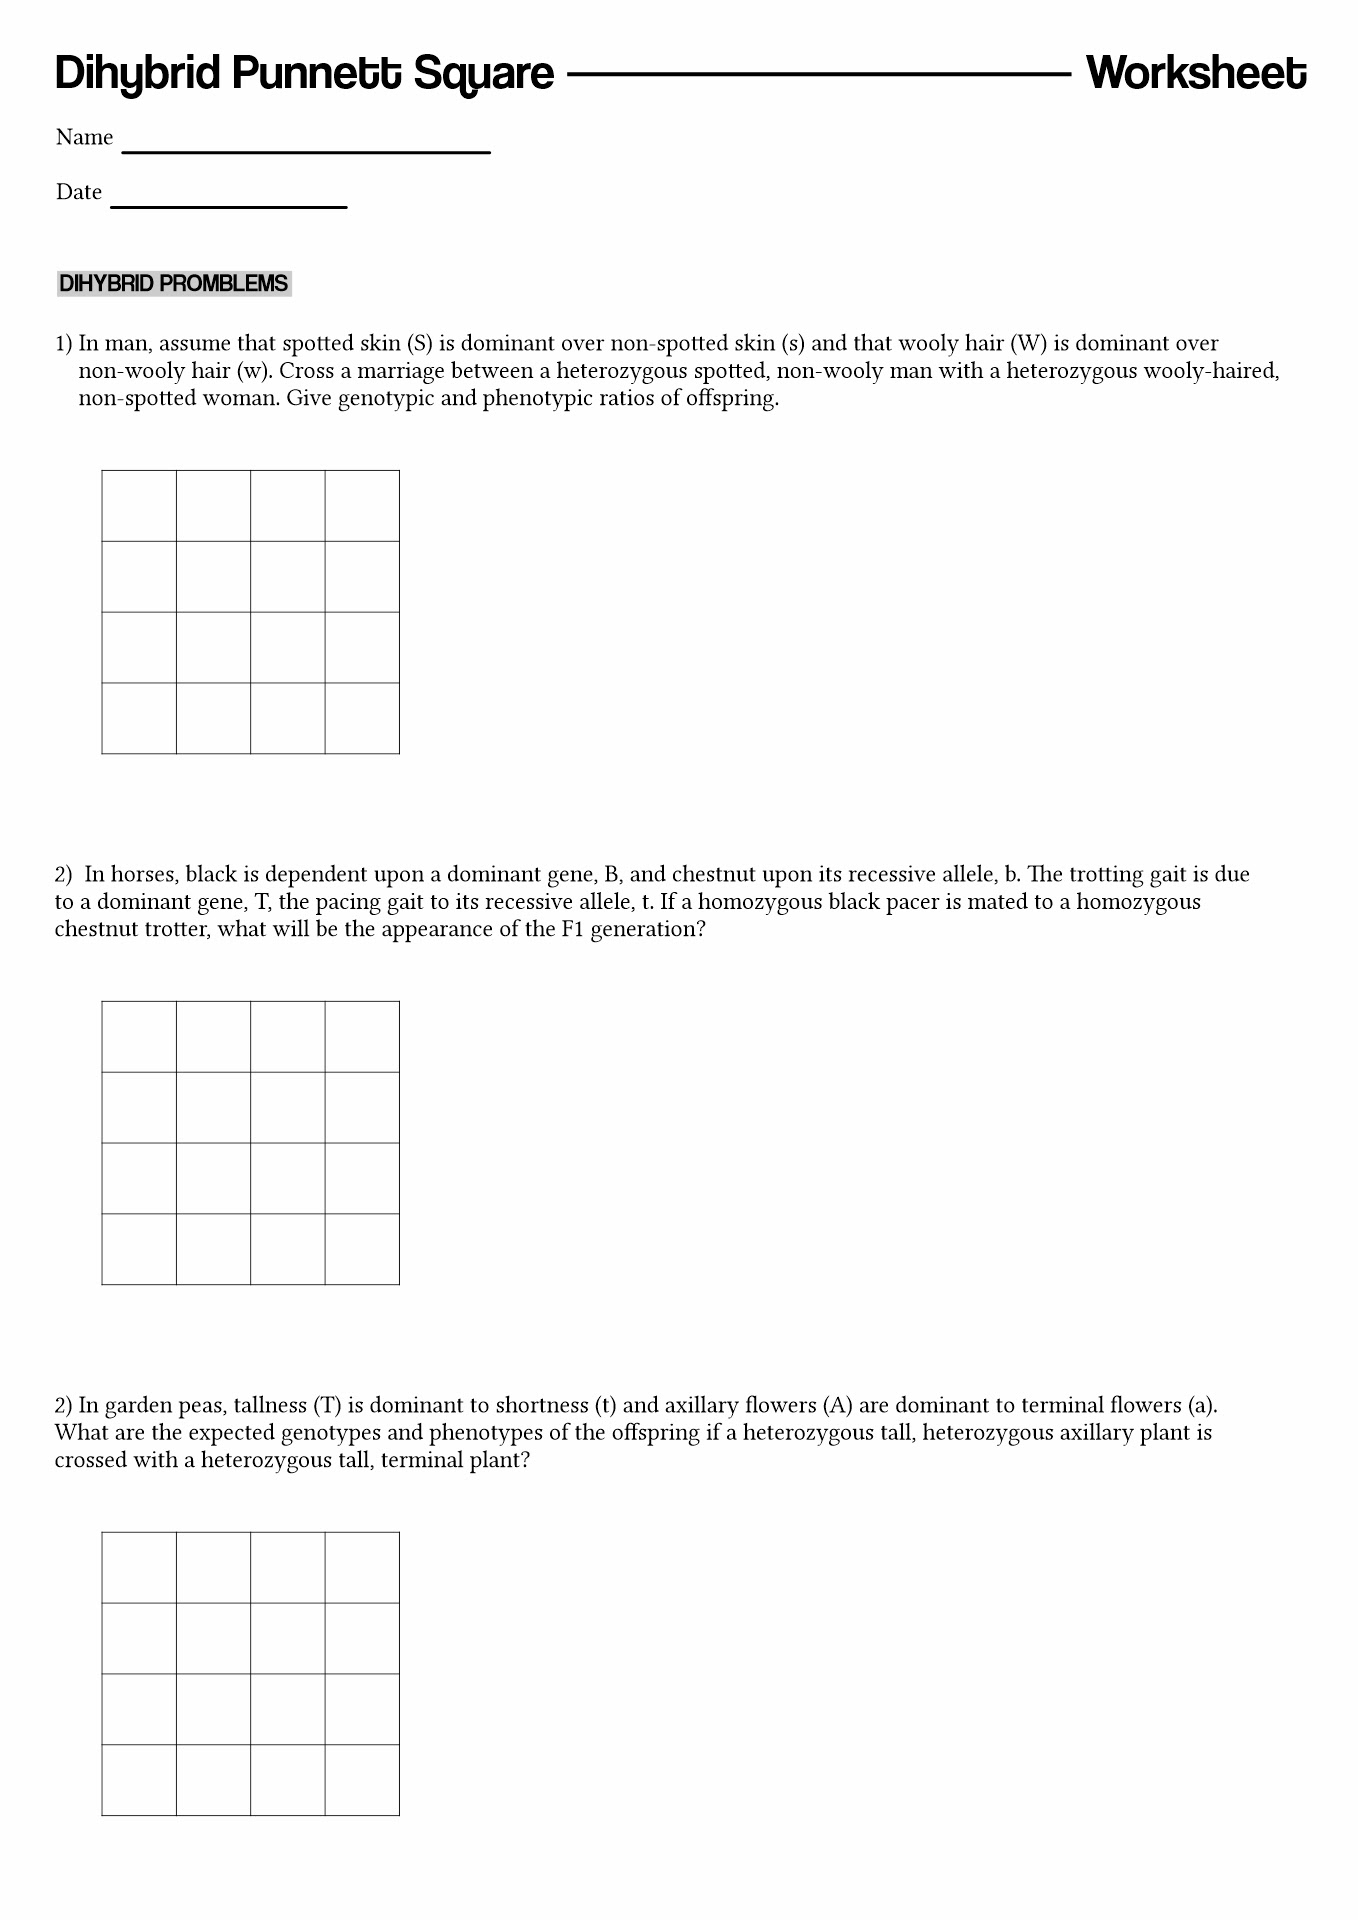 sea-floor-spreading-worksheet-pearson-education-answers-qeducationz